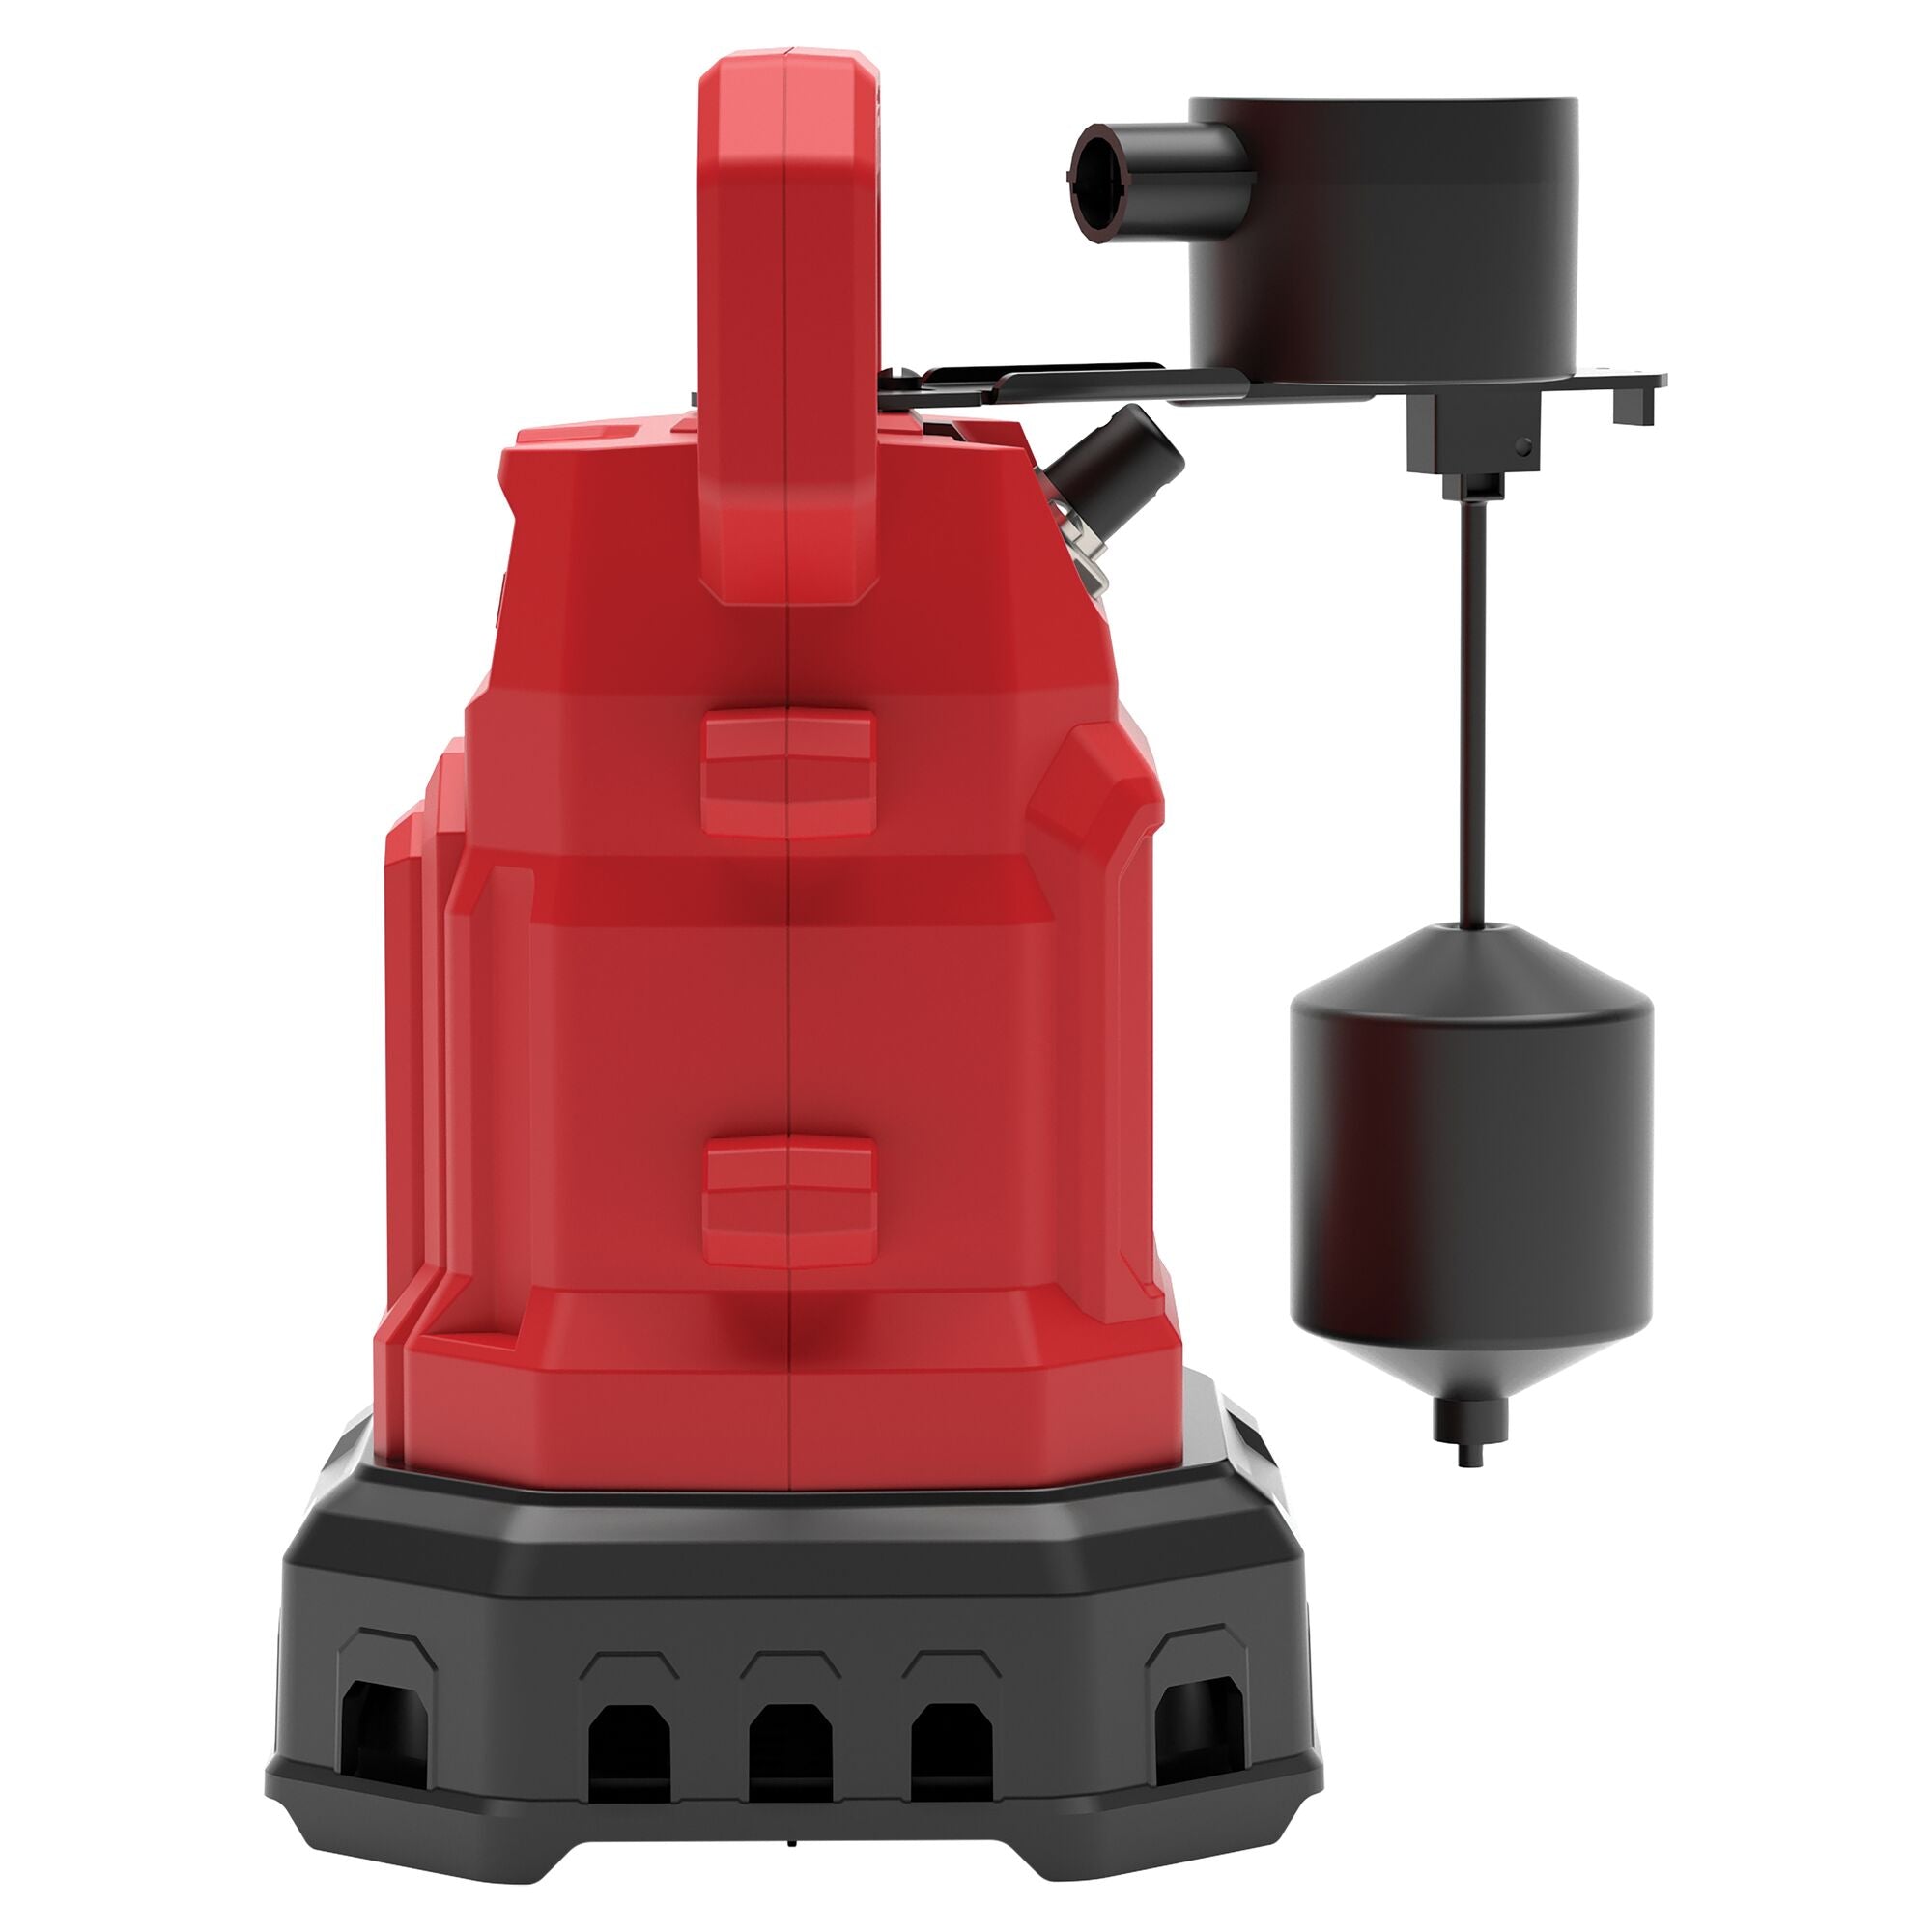 1-2HP SUMP PUMP REINFORCED THERMOPLASTIC SUBMERSIBLE AUTOMATIC VERTICAL SWITCH RIGHT VIEW